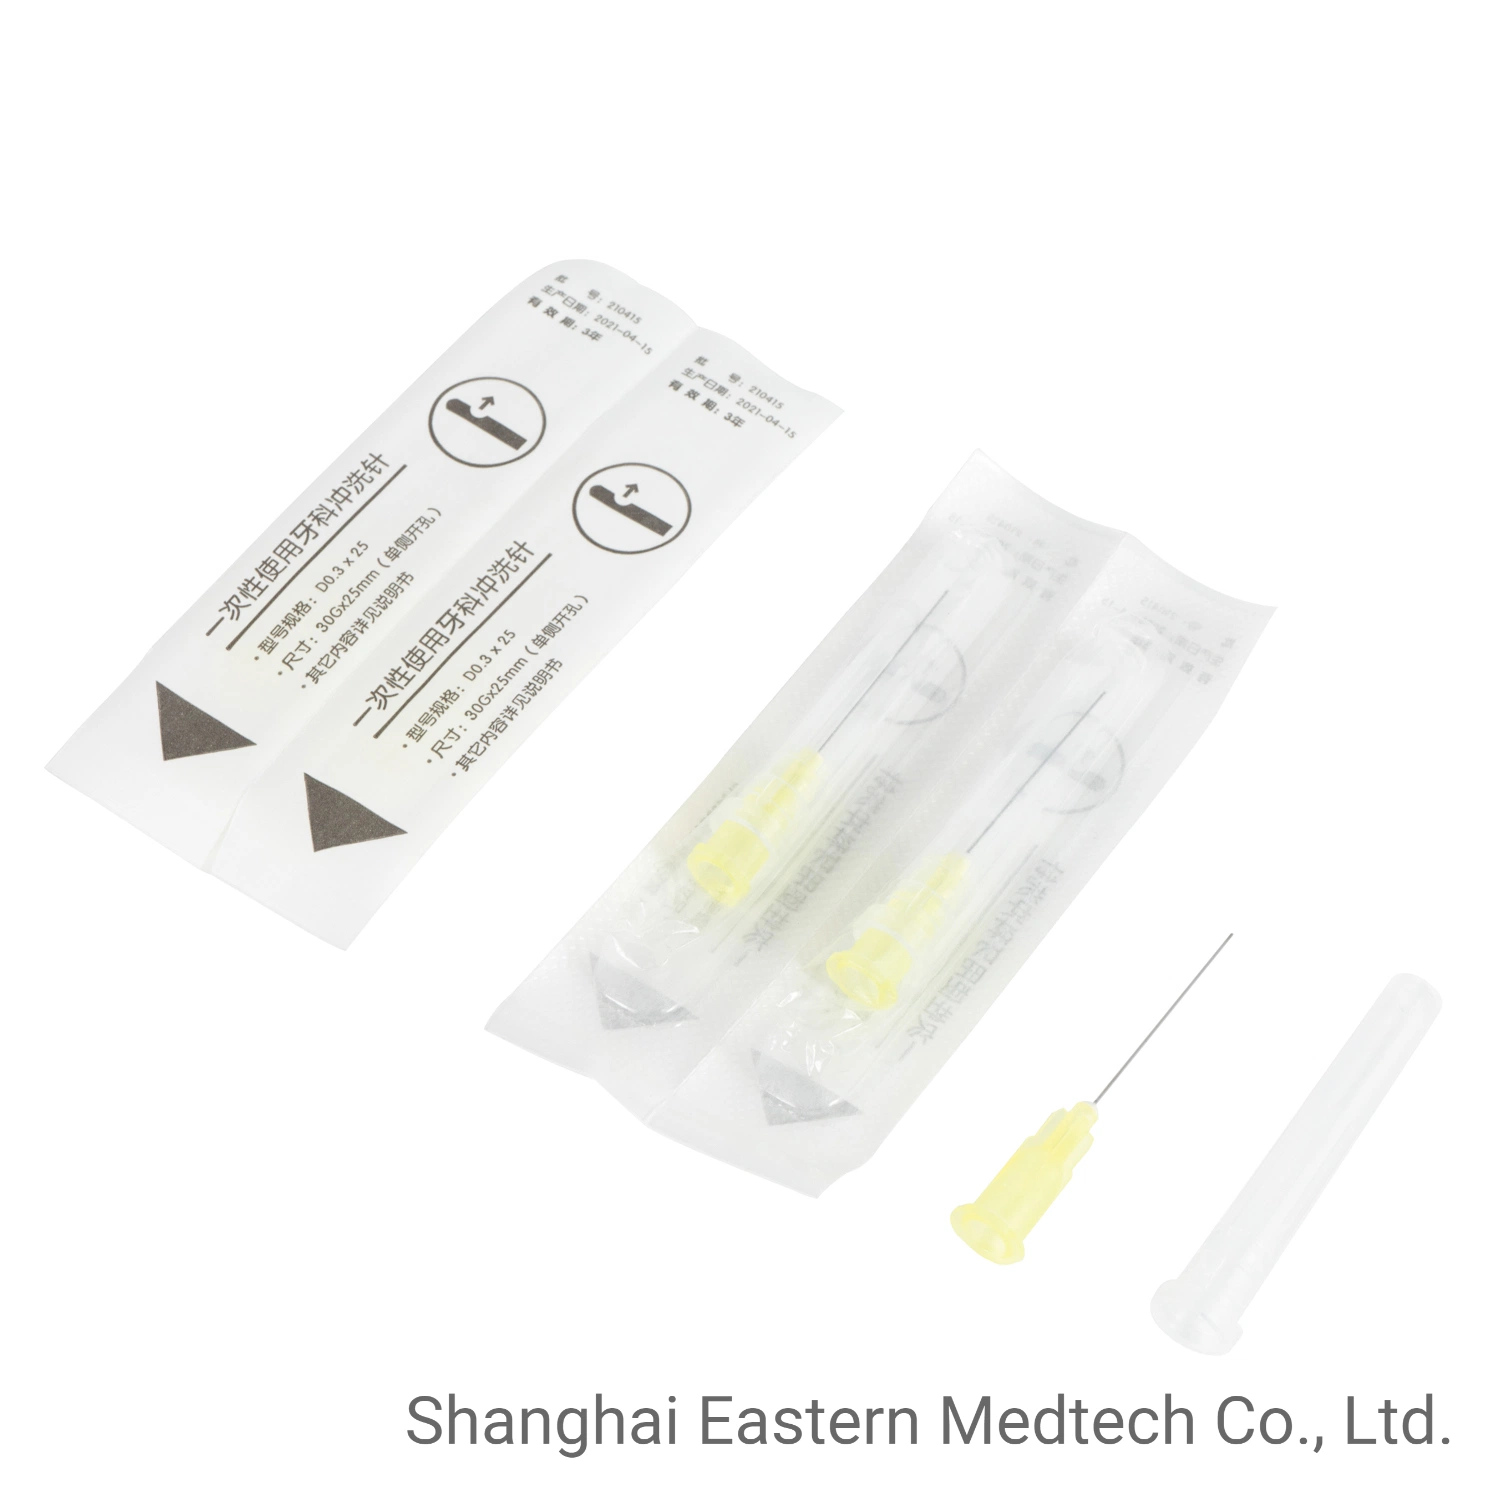 International Standard Disposable Medical Products for Dentist Use 23G/25g/ 27g / 30g Endo Irrigation Needle Tip Dental Application Needle